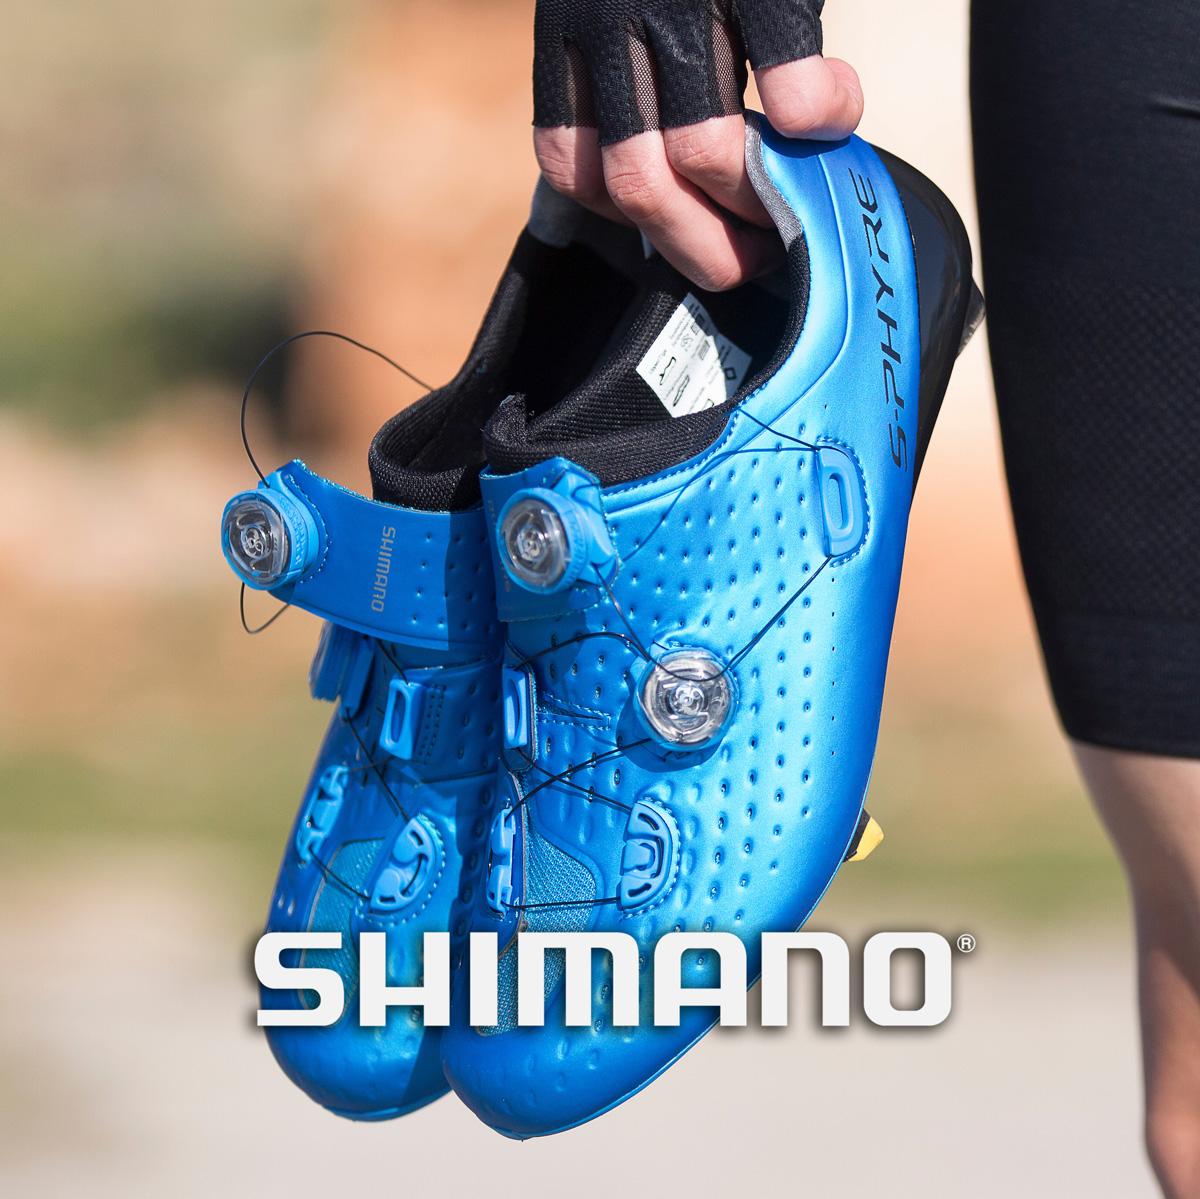 shimano-shoe-size-chart-hit-the-road-with-the-right-sized-cycling-shoes